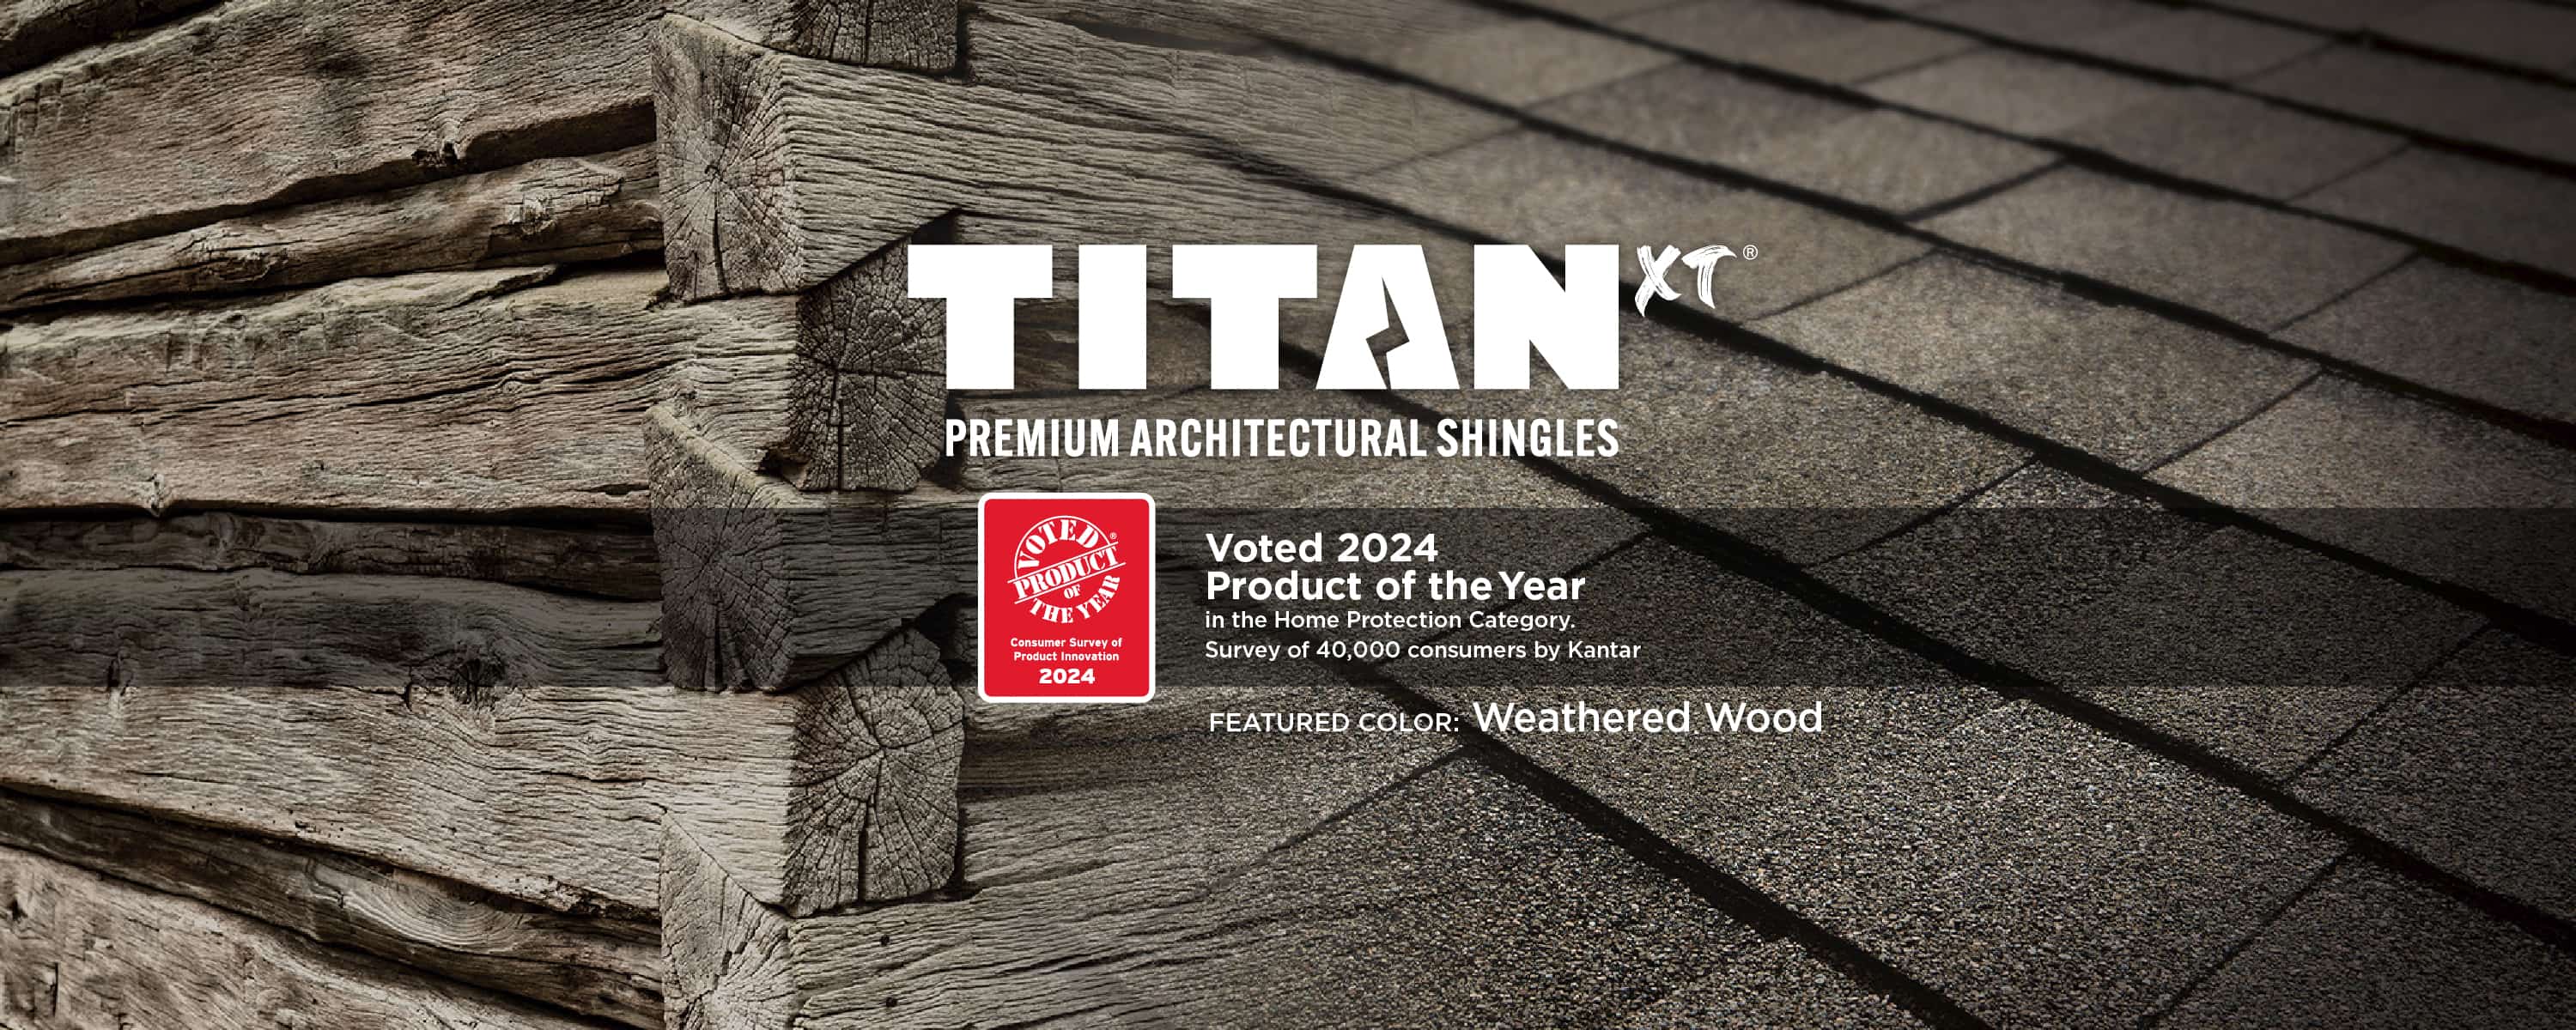 Titan XT 2024 Product of the Year - Weathered Wood